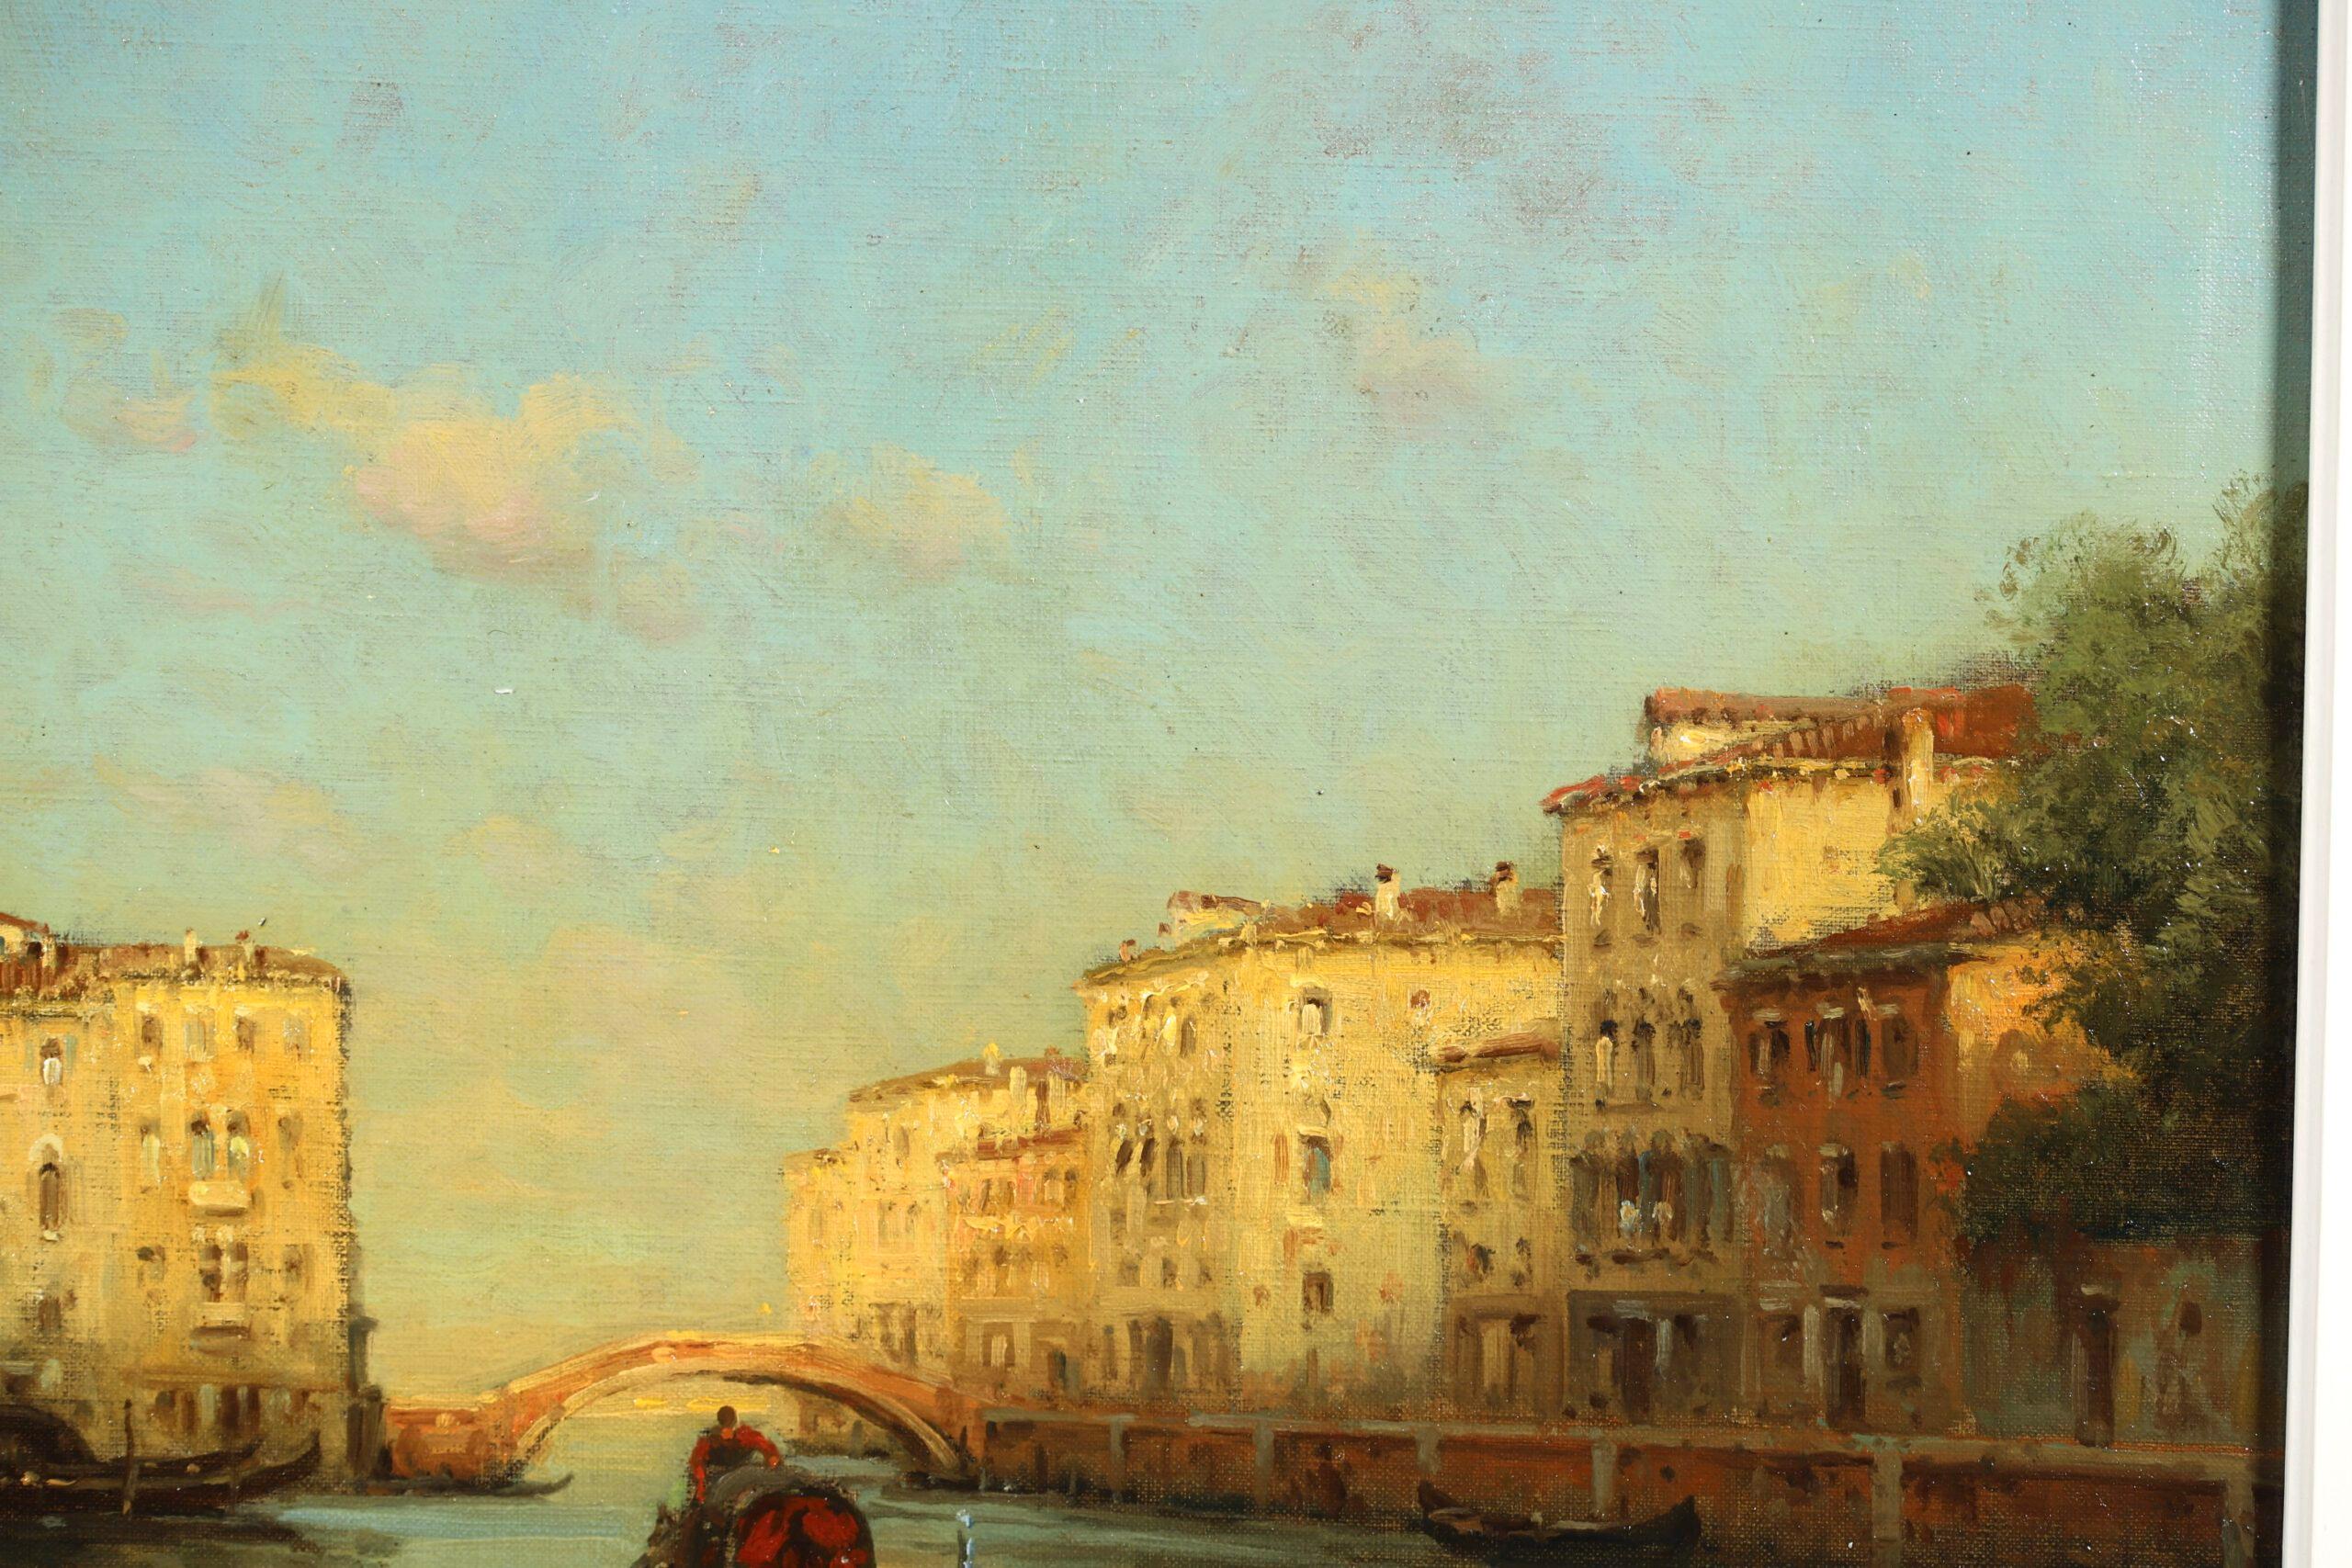 Gondolier on a Canal - Impressionist Landscape Oil Painting by Antoine Bouvard For Sale 2